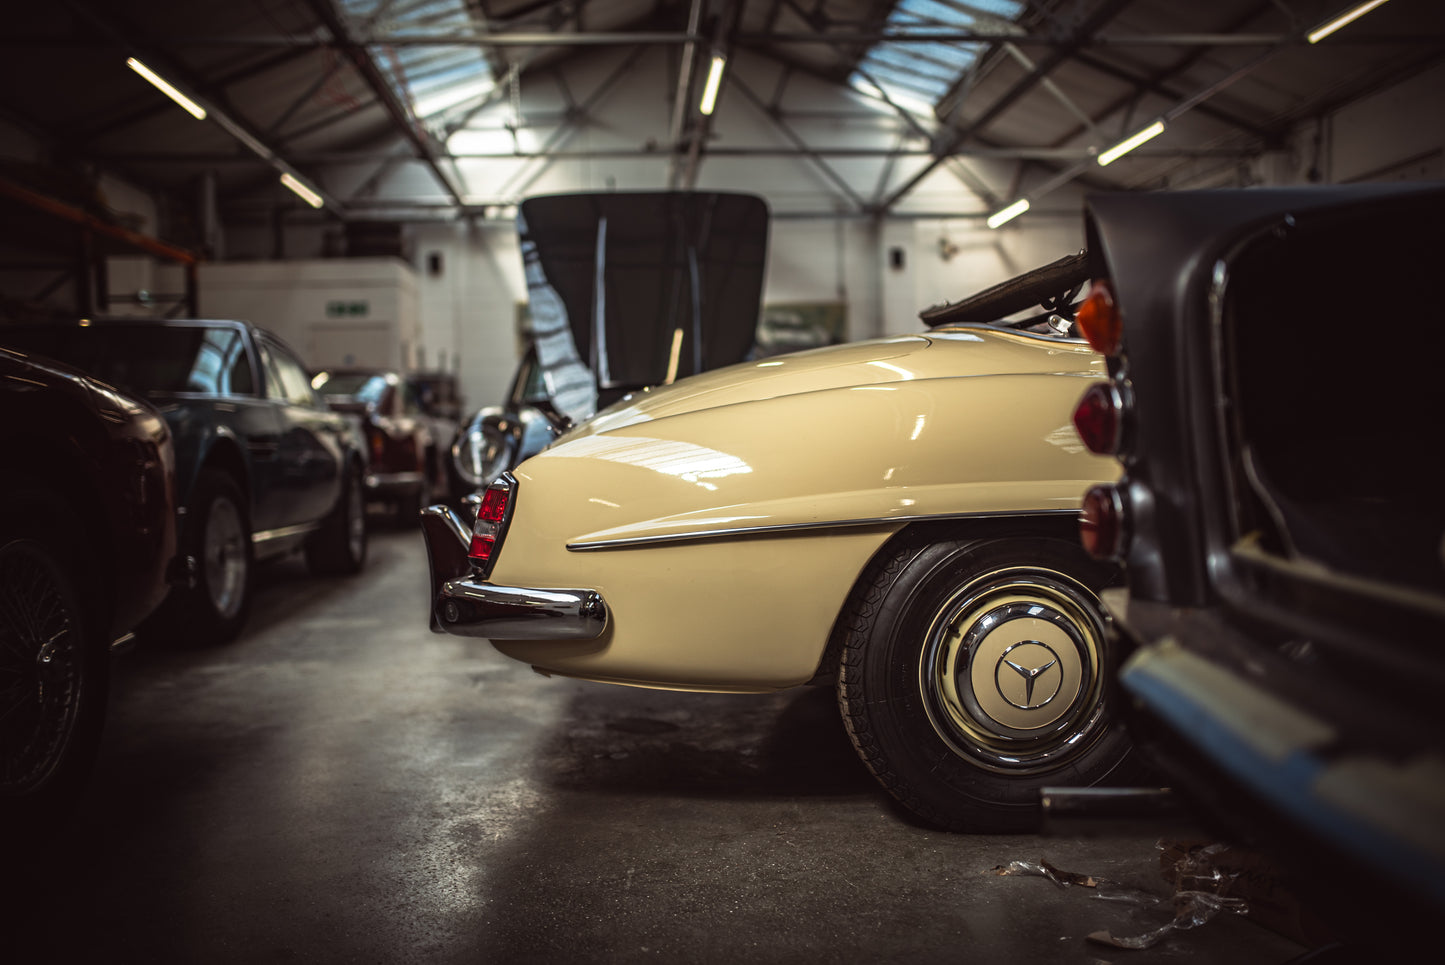 1958 Mercedes-Benz 190 SL W121 restauration project, parked up in a garage. Automotive Photography, classic car, vintage vehicle, car photography. Photo prints, wall decor.